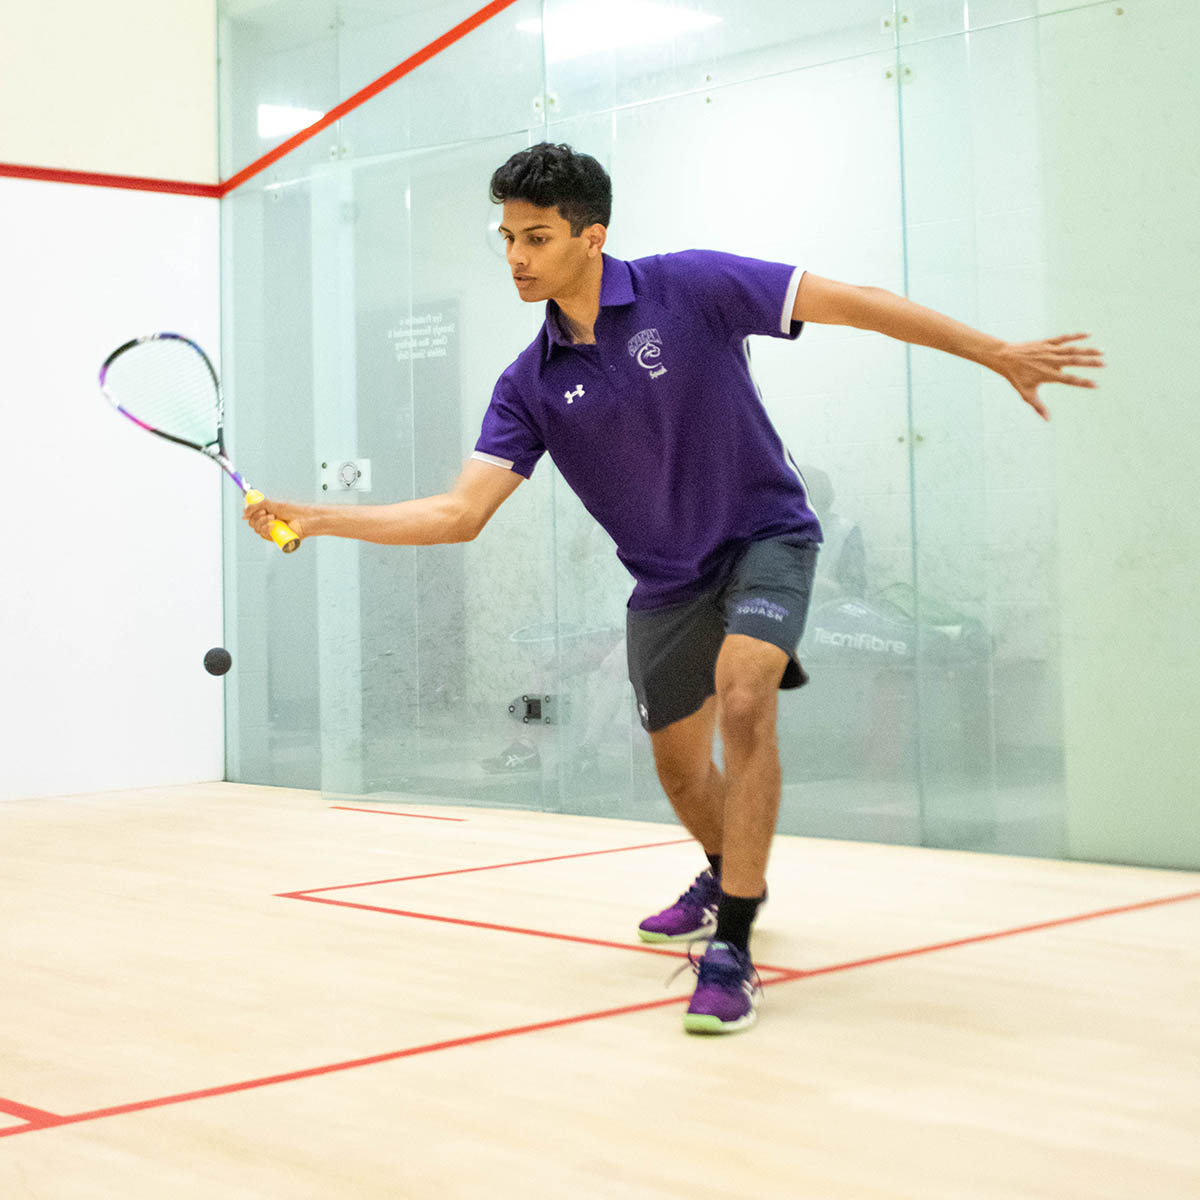 Photo of Jared playing squash in a purple Chatham uniform